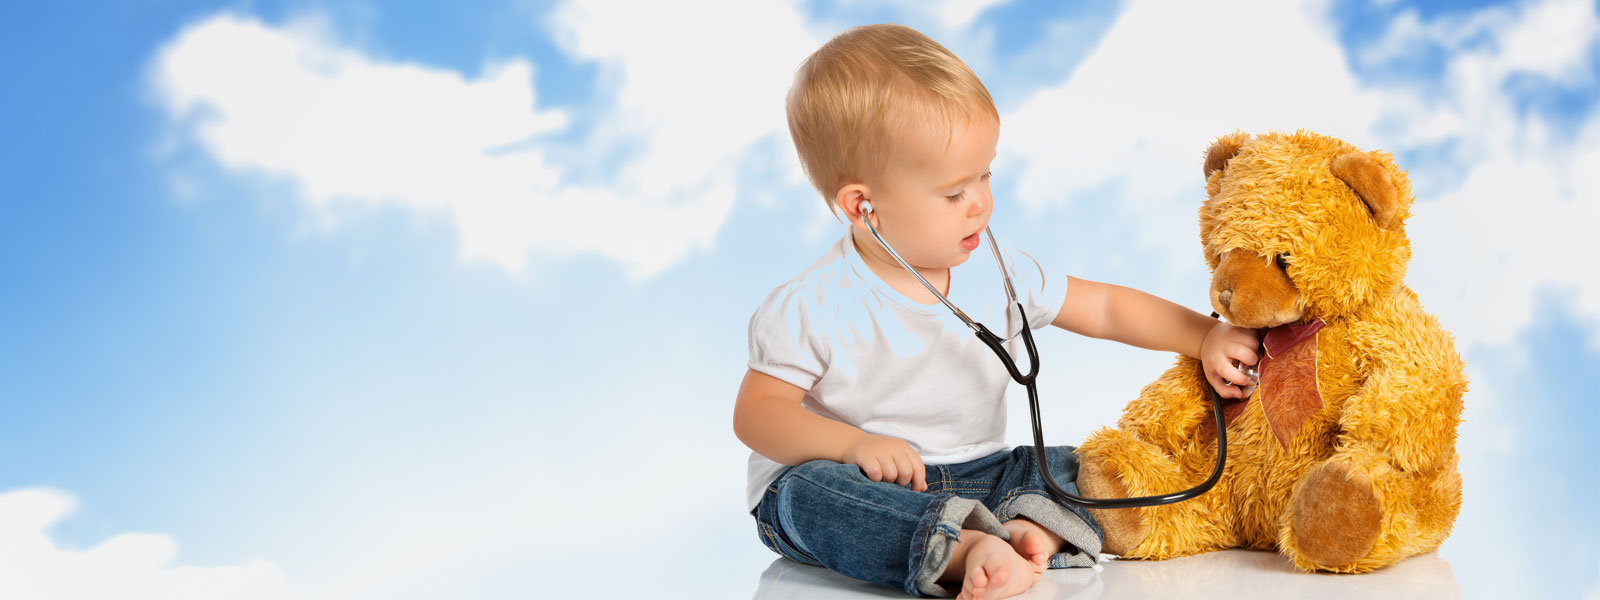 Welcome to the Pediatric Cardiology Care Website